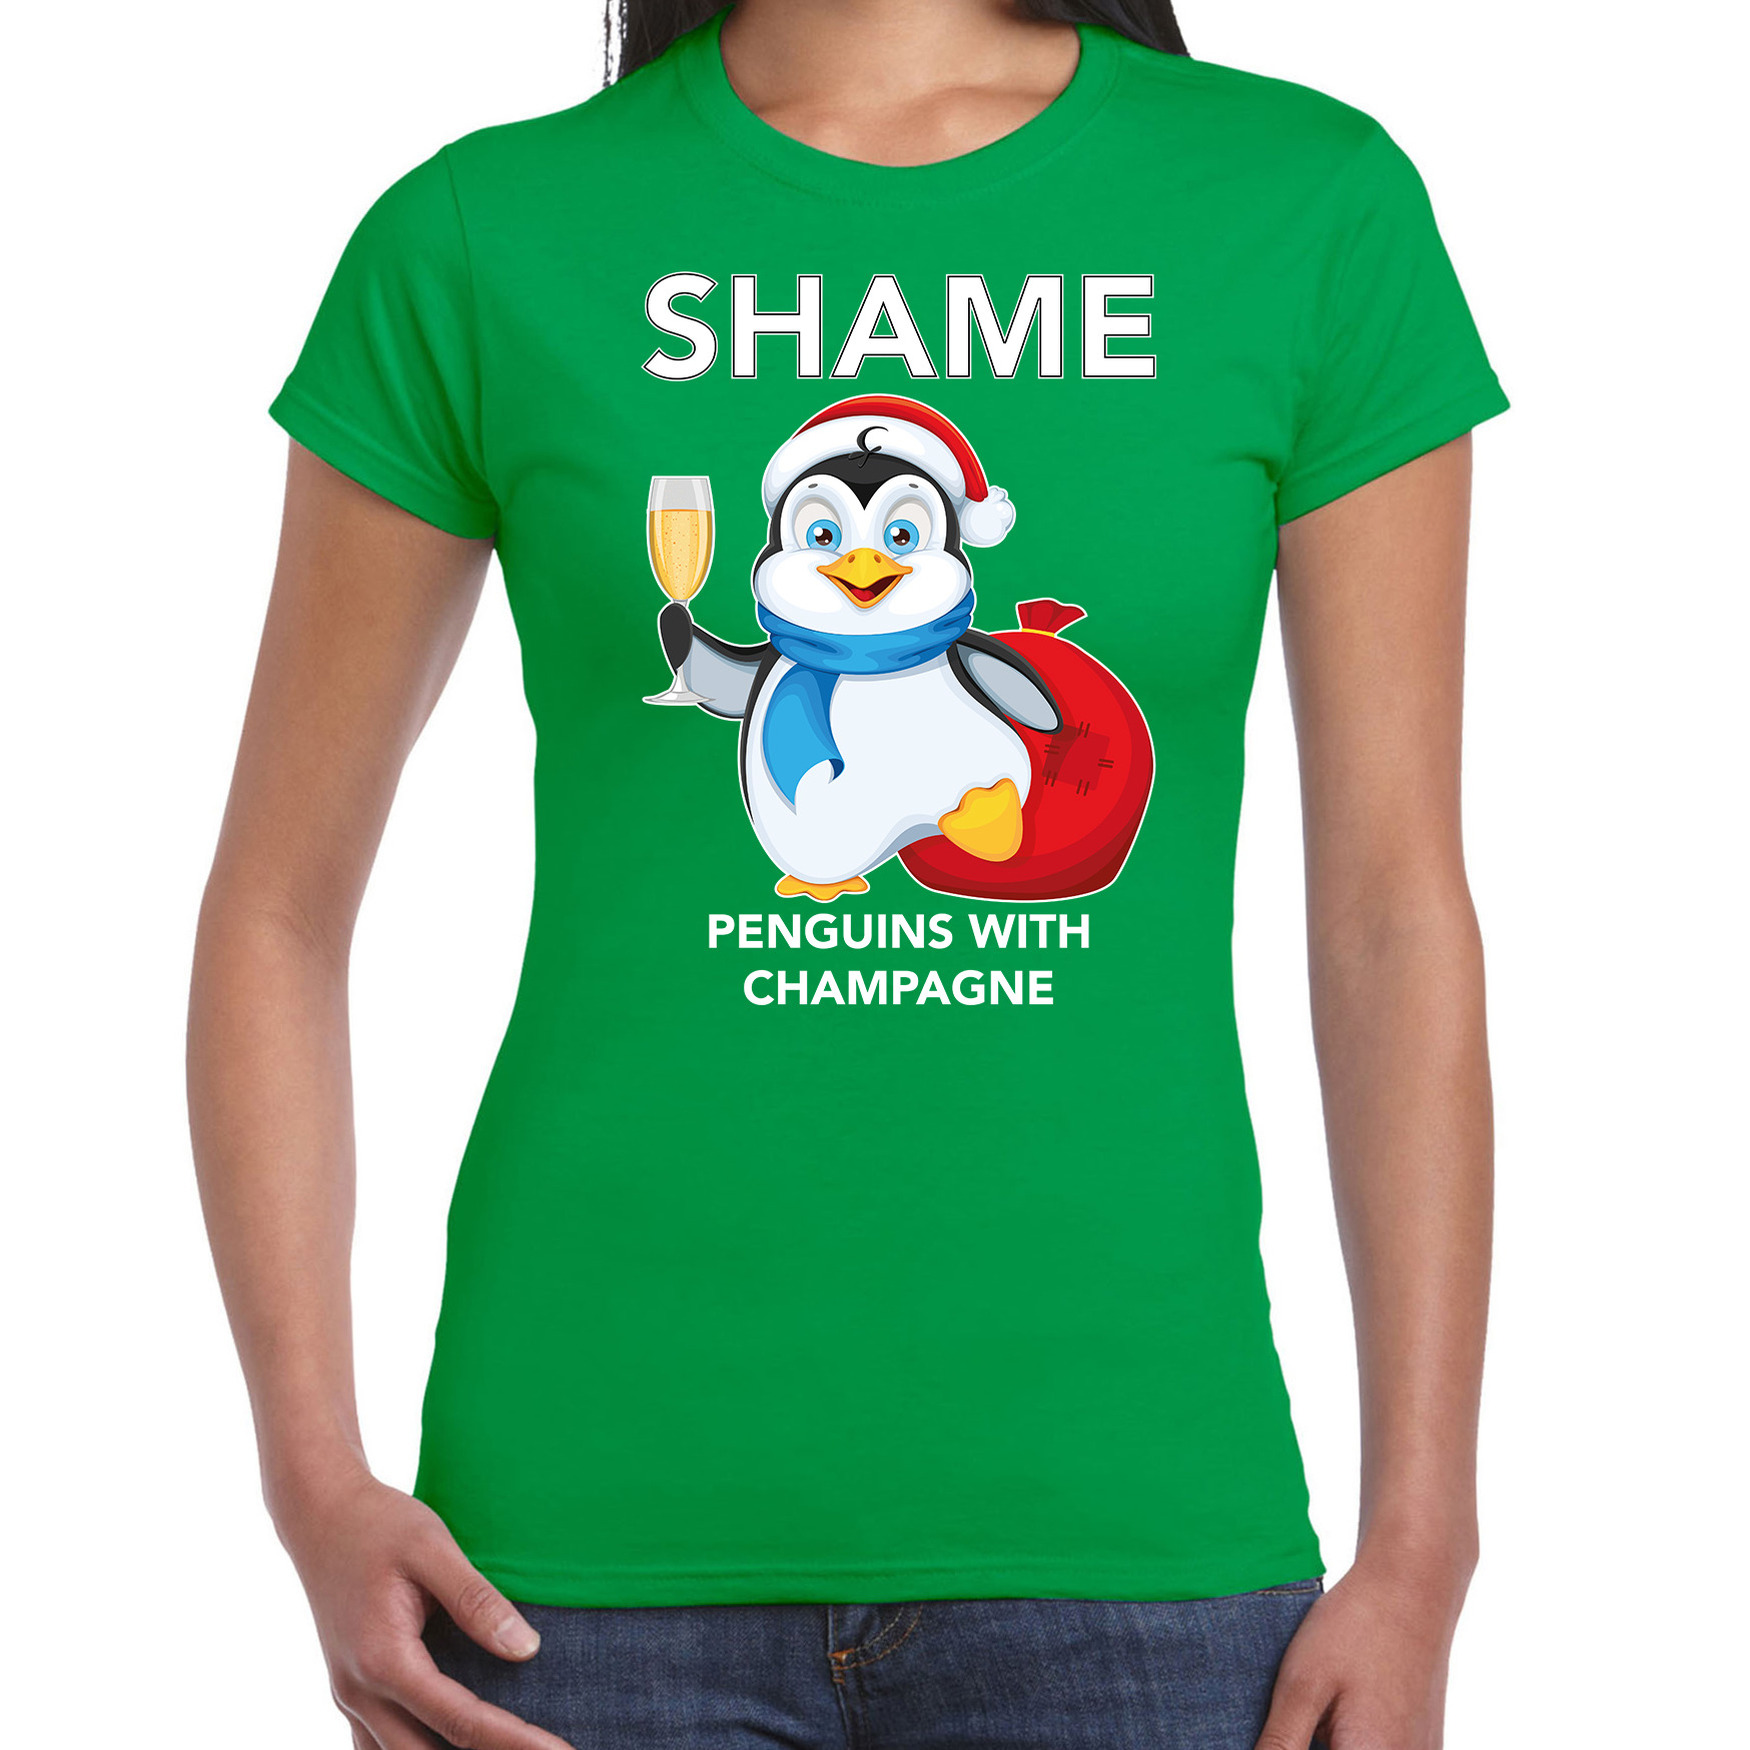 Pinguin Kerst t-shirt-outfit Shame penguins with champagne groen voor dames